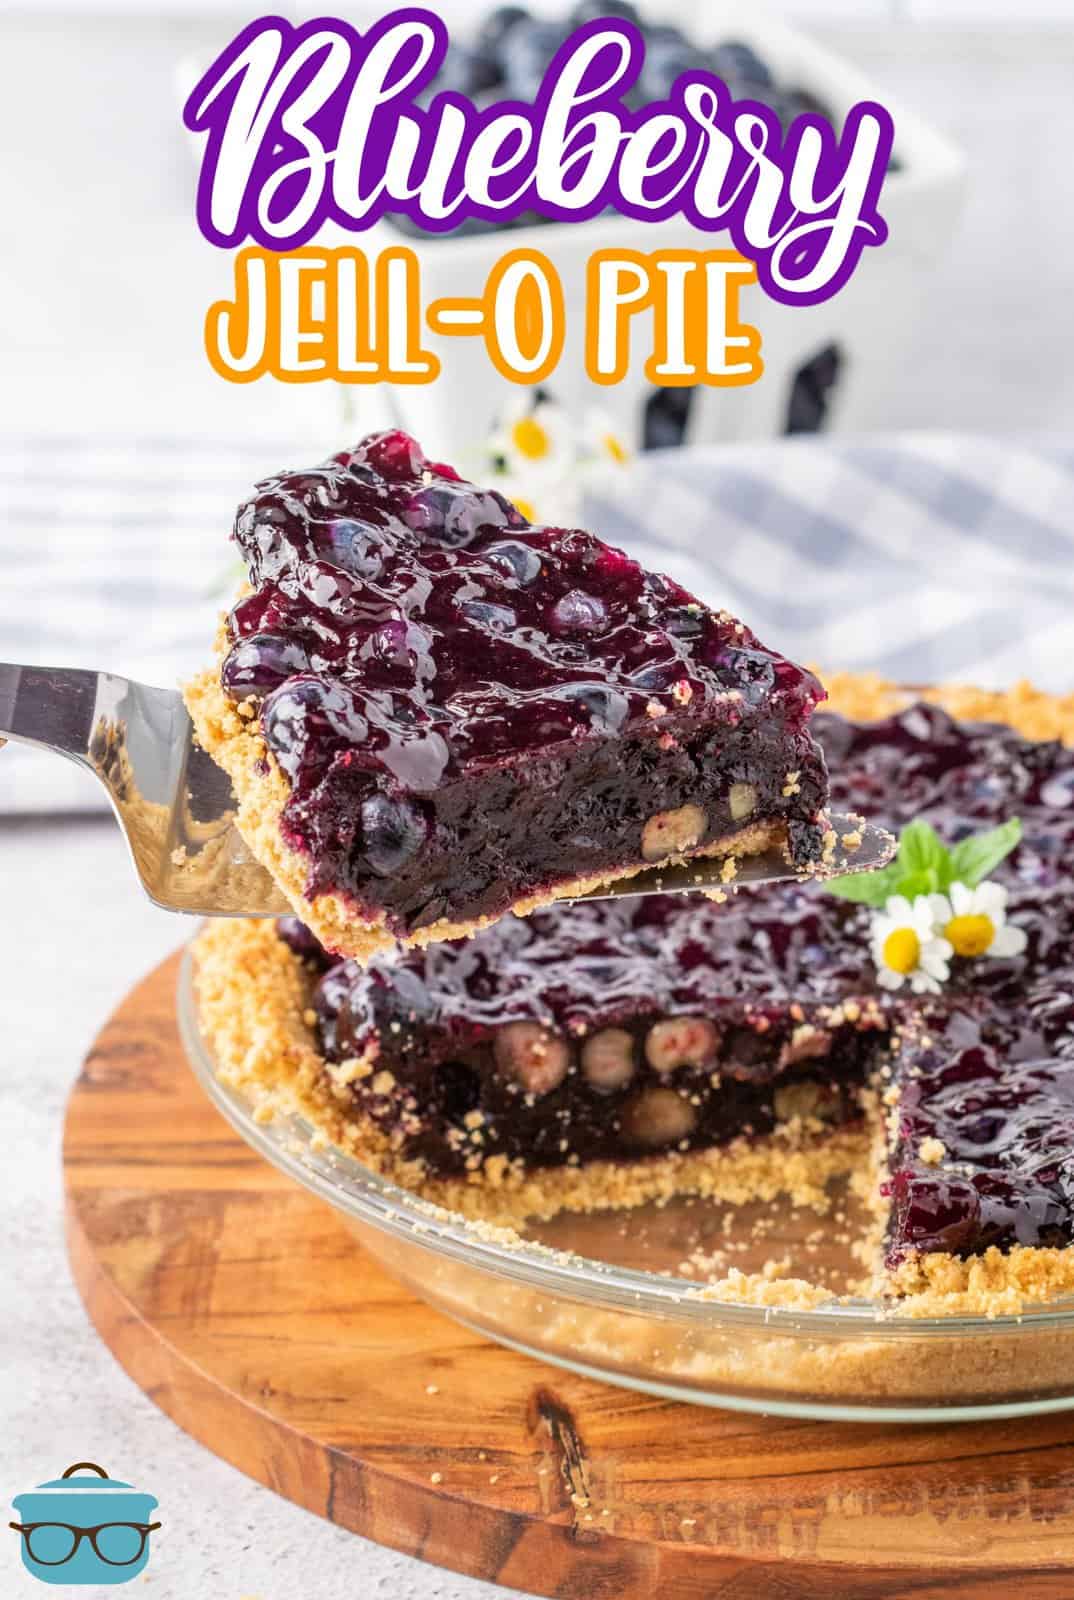 A pie serving utensil holding a slice of Blueberry Jell-O Pie above a plate with the rest of the homemade pie.